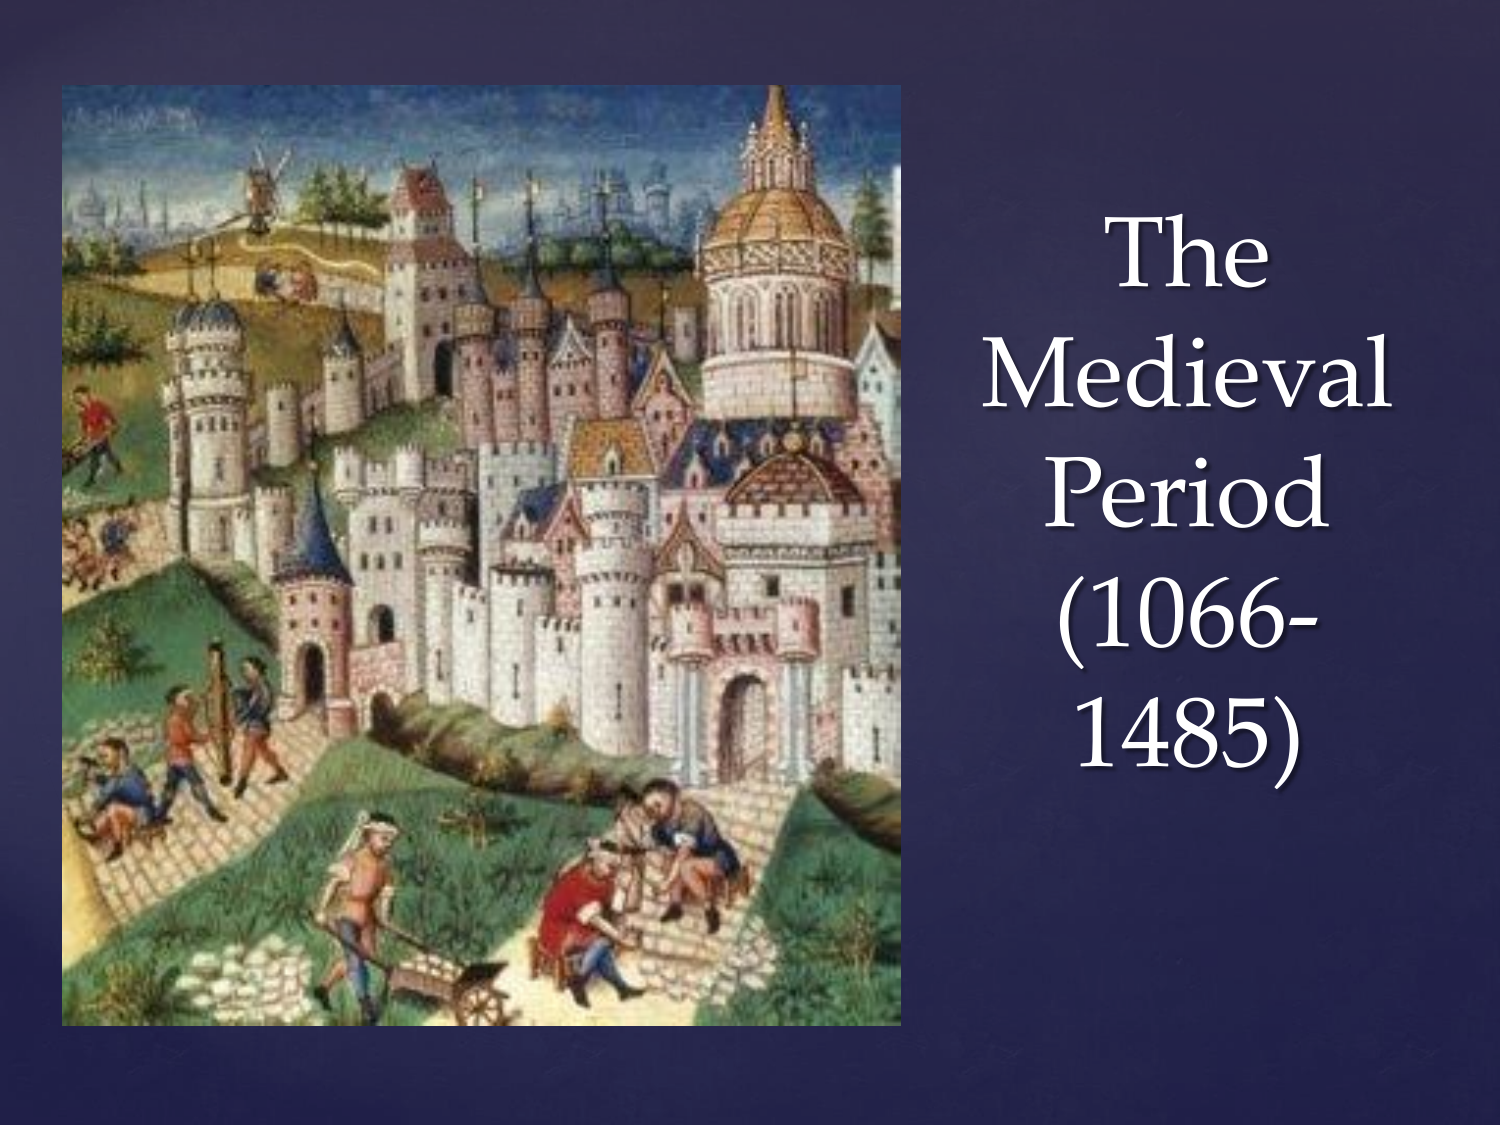 The Medieval Period (10661485)